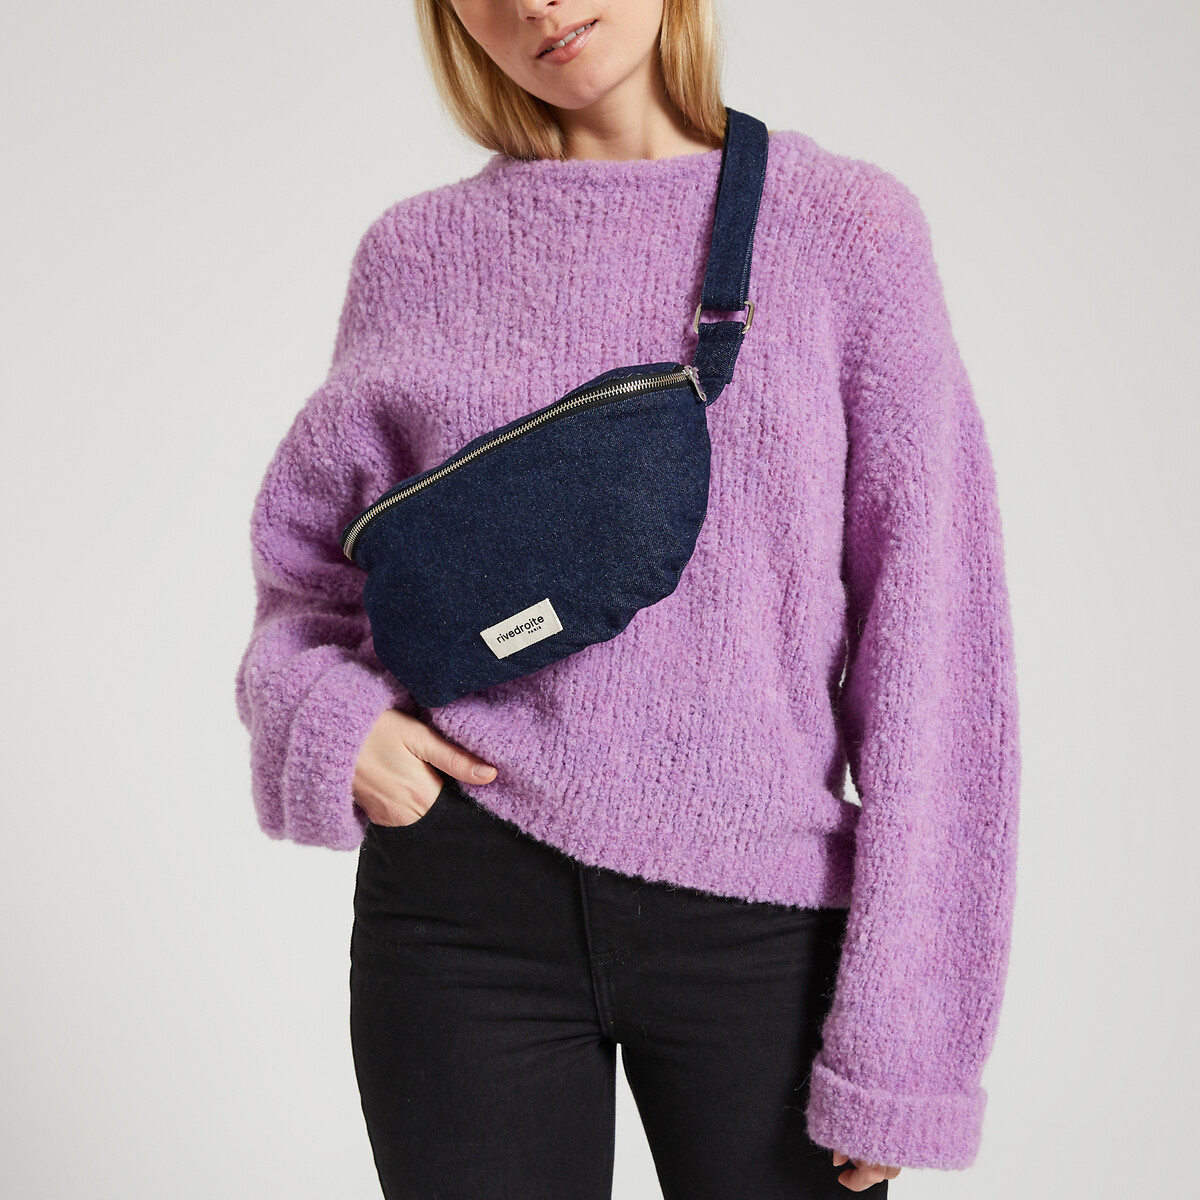 The Custine Zip-Up Bum Bag in Cotton Canvas